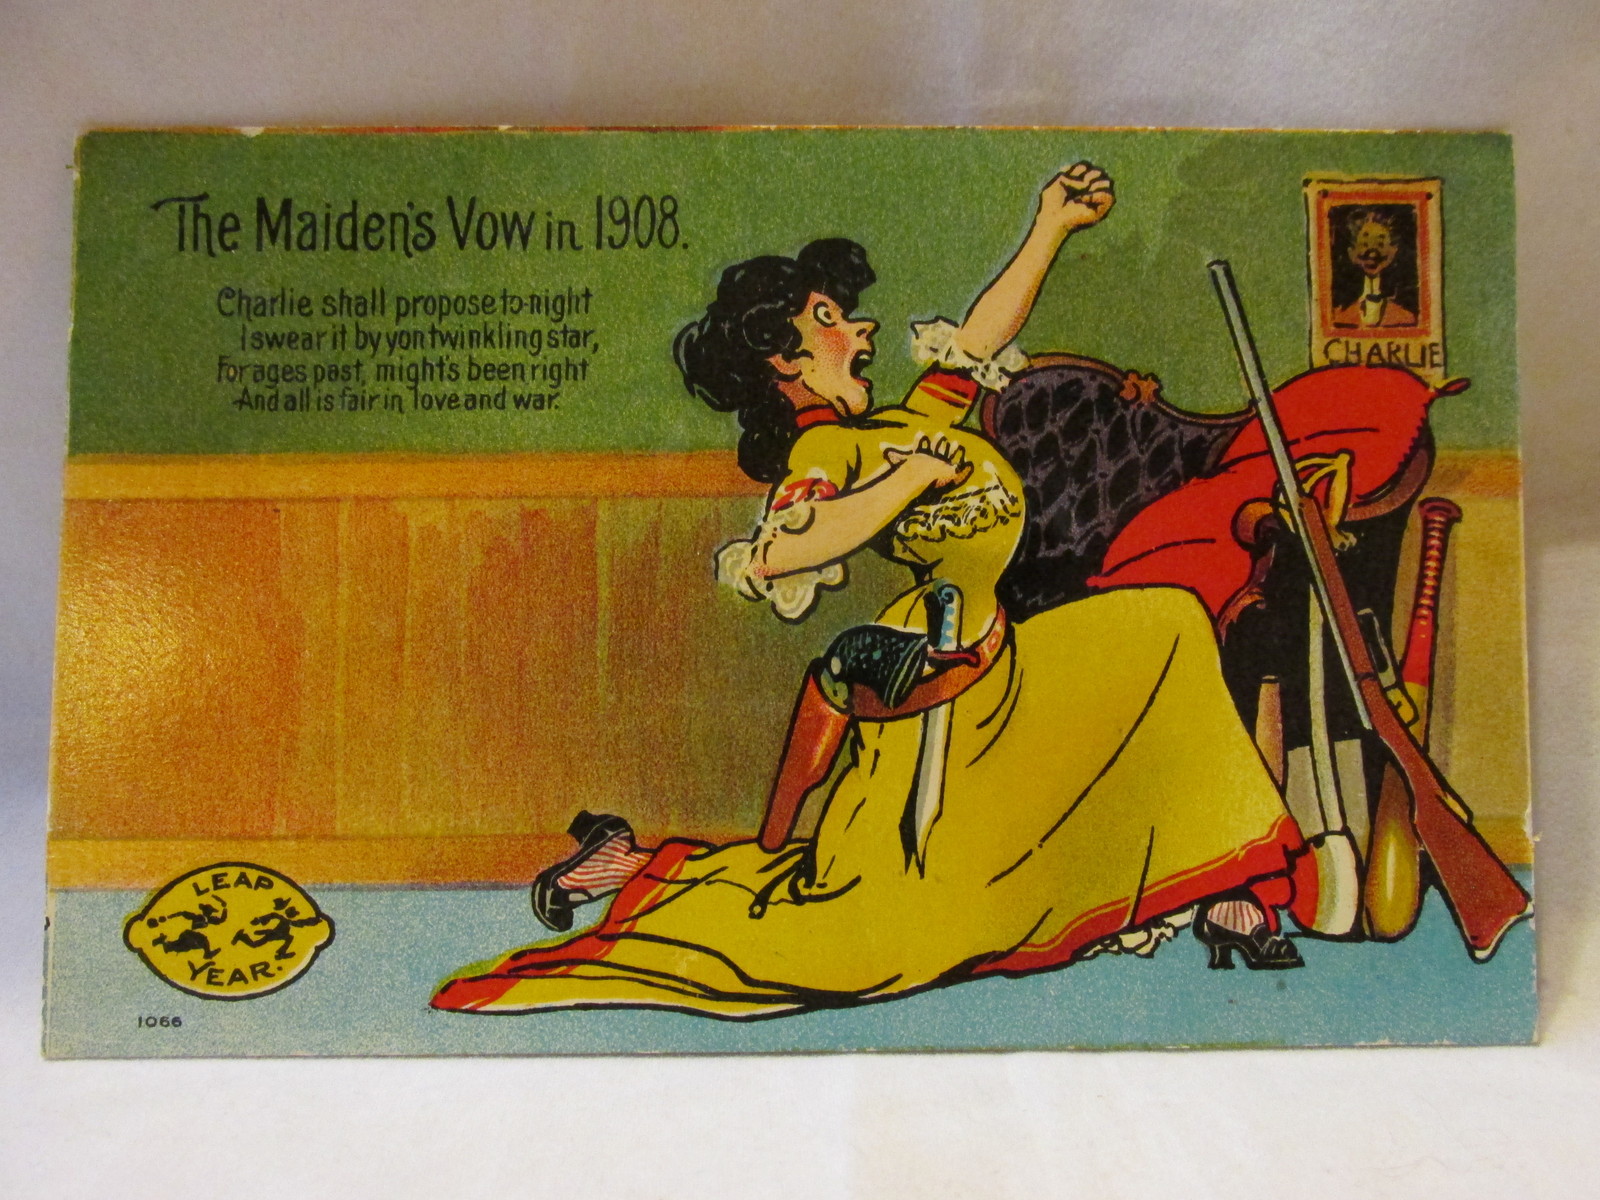 Primary image for Antique Leap Year Postcard - "The Maiden's Vow in 1908", Unposted